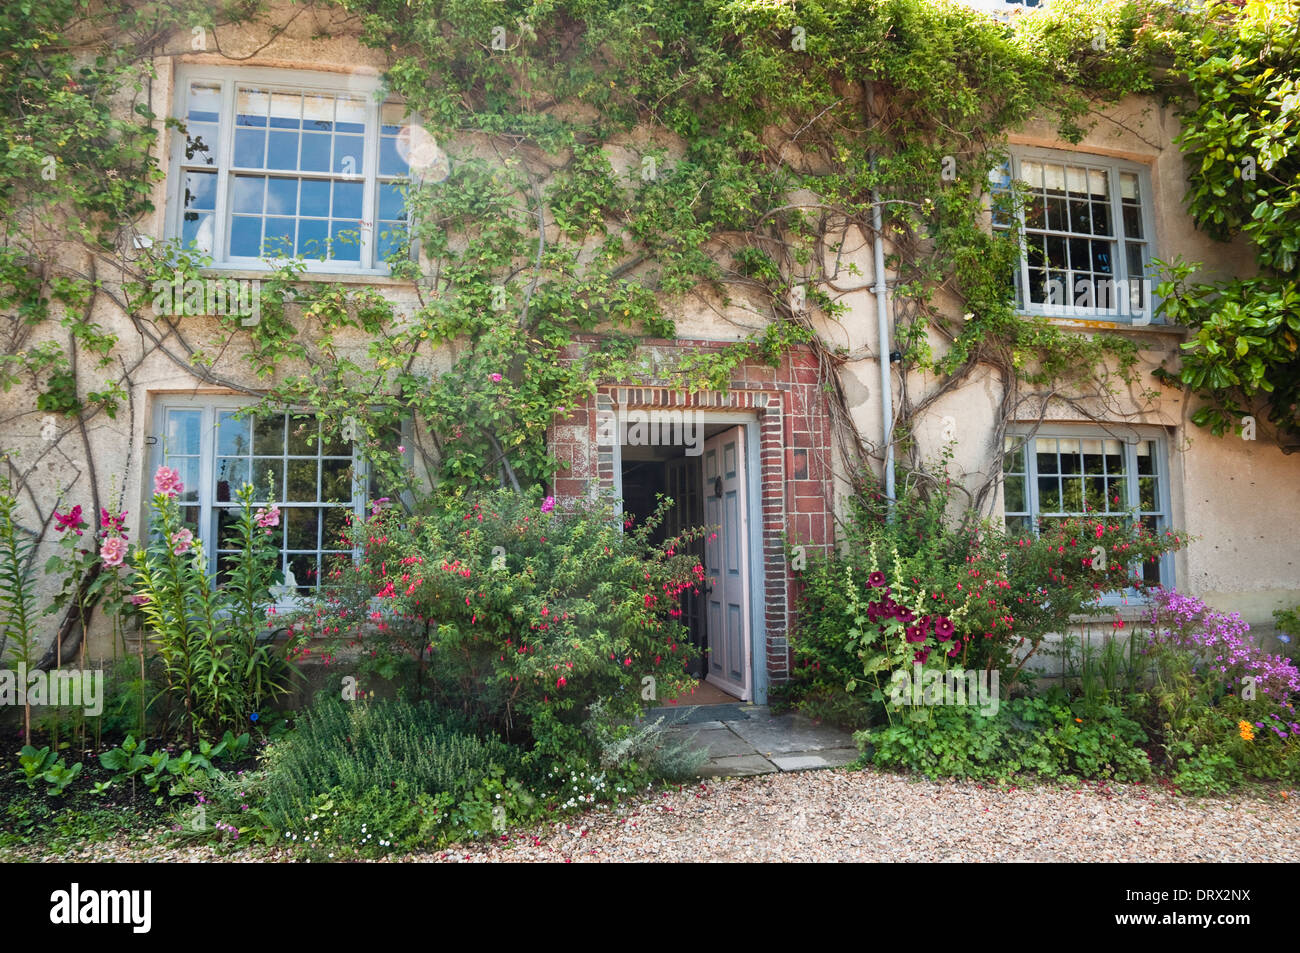 Charleston Farmhouse, Sussex, showing front elevation surrounded by informal border planting and wall climbing roses / shrubs. Stock Photo